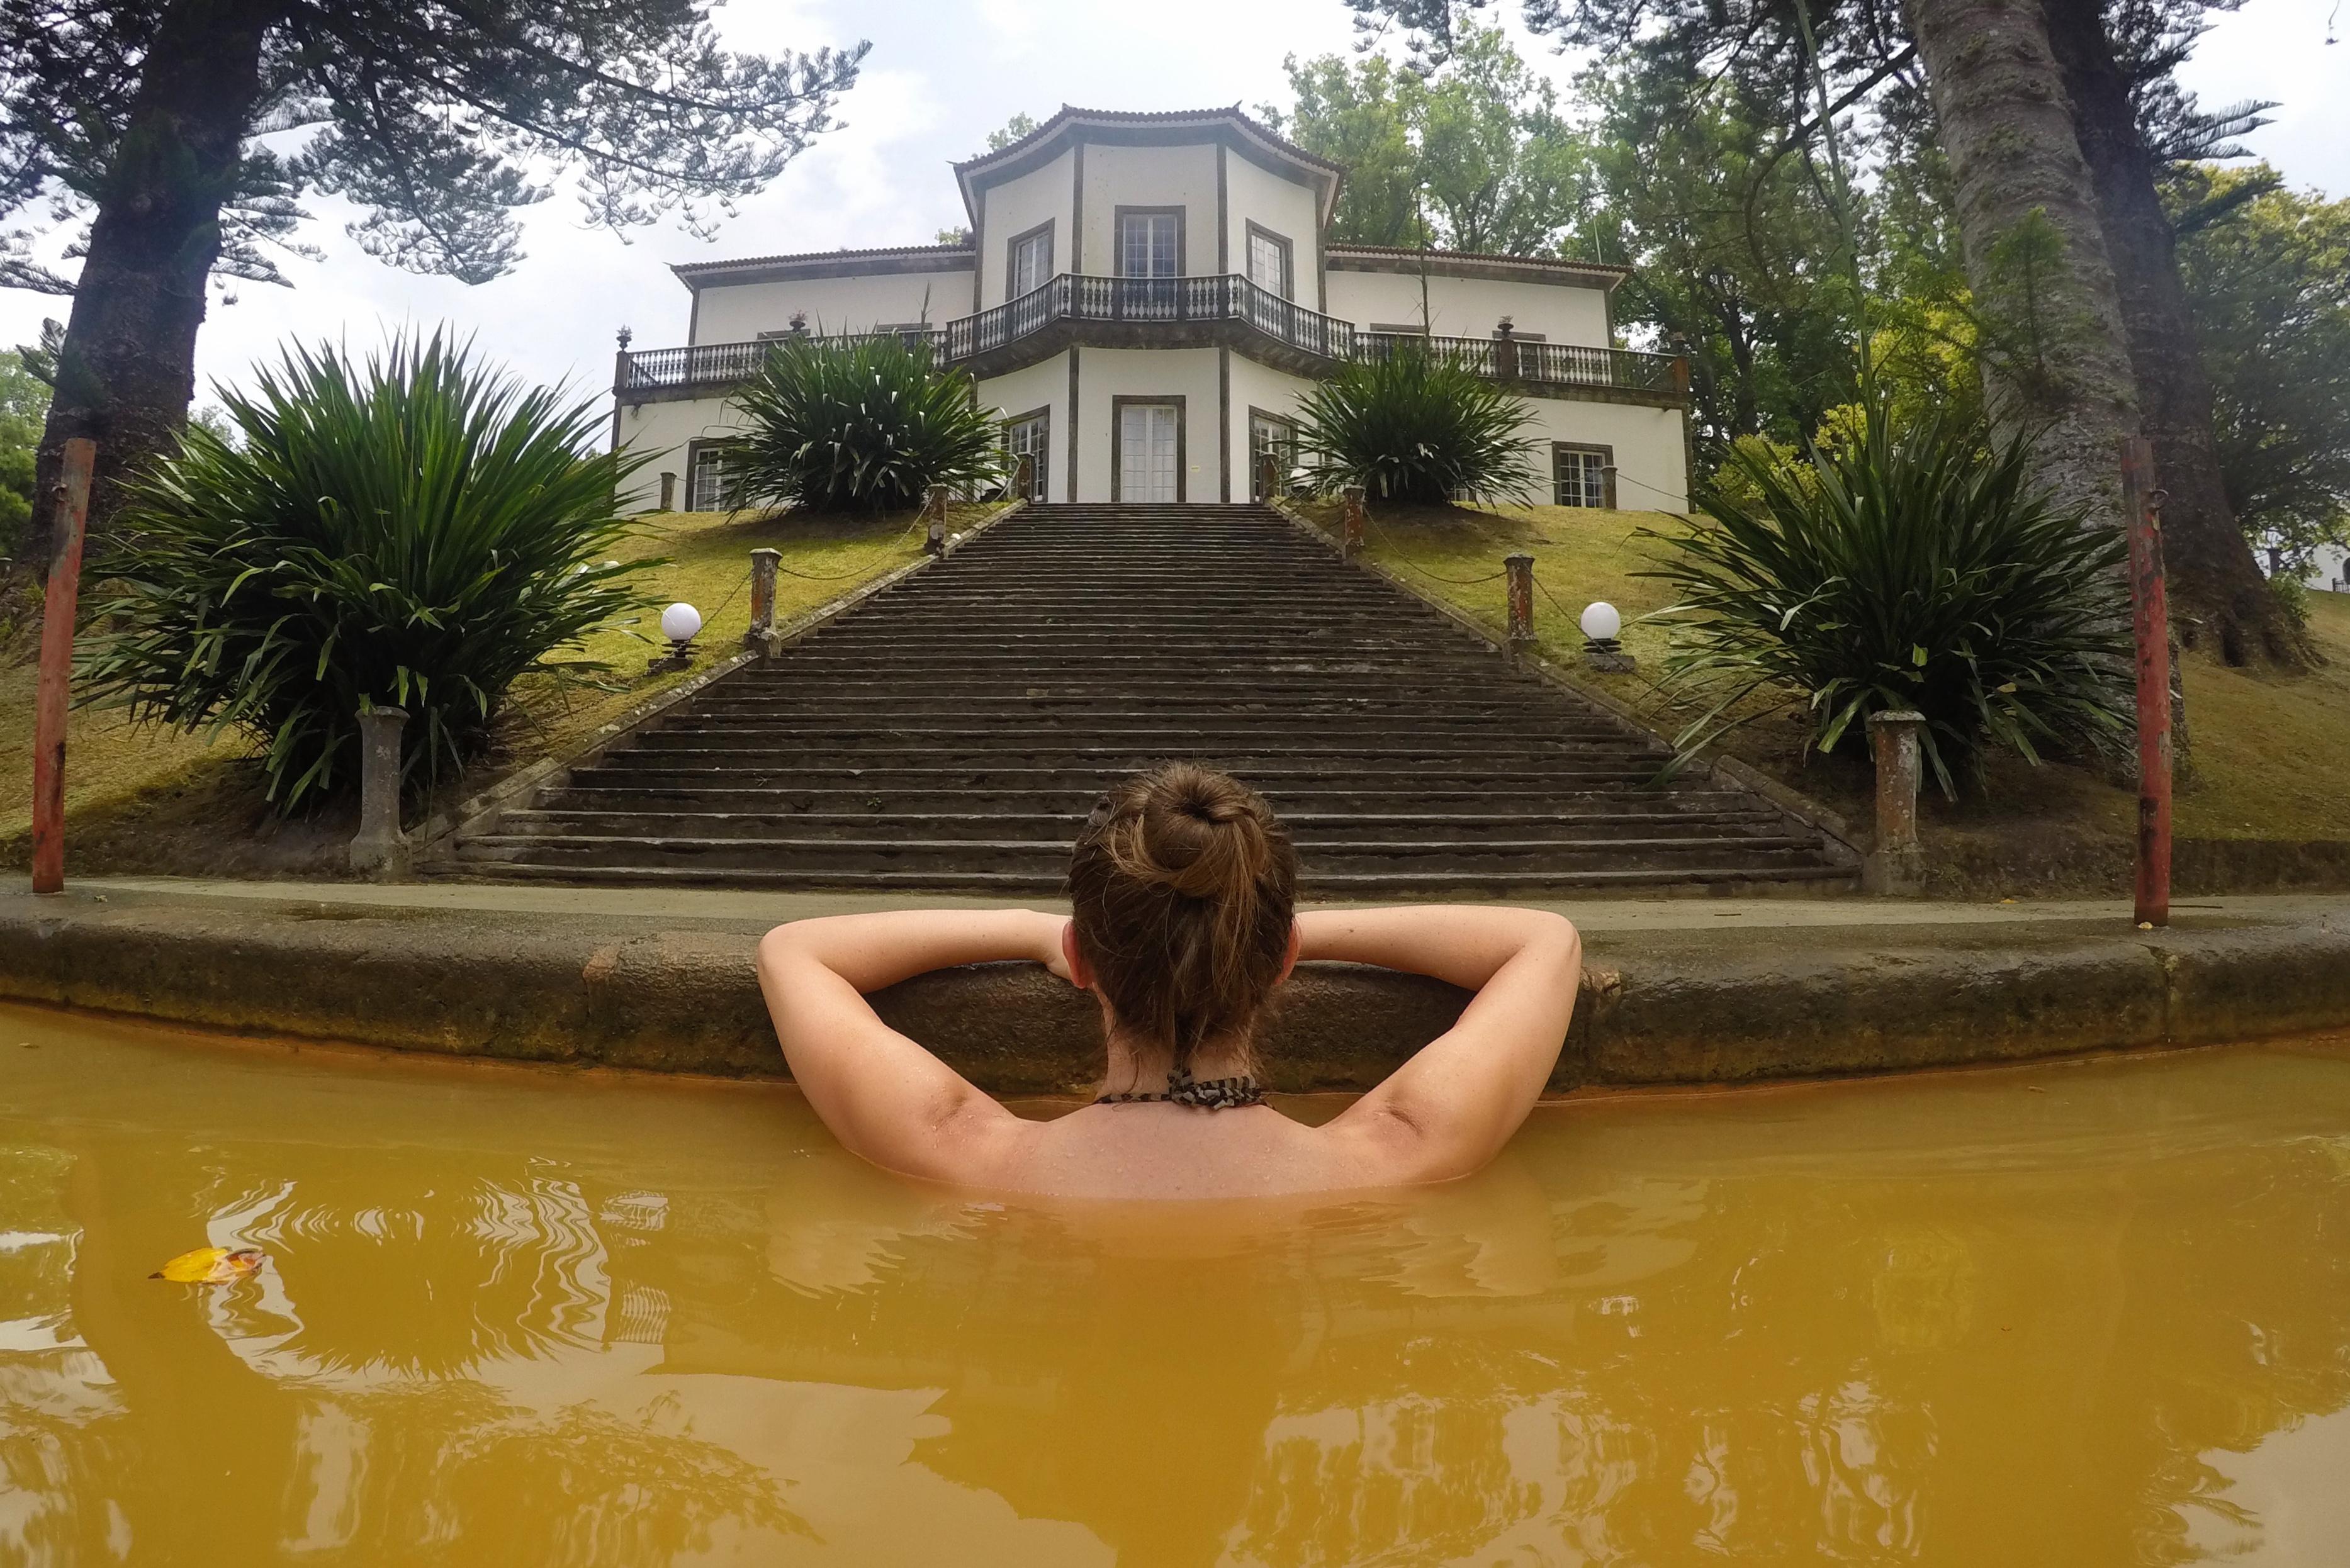 Hot springs at Terra Nostra Hotel in Furnas, Azores